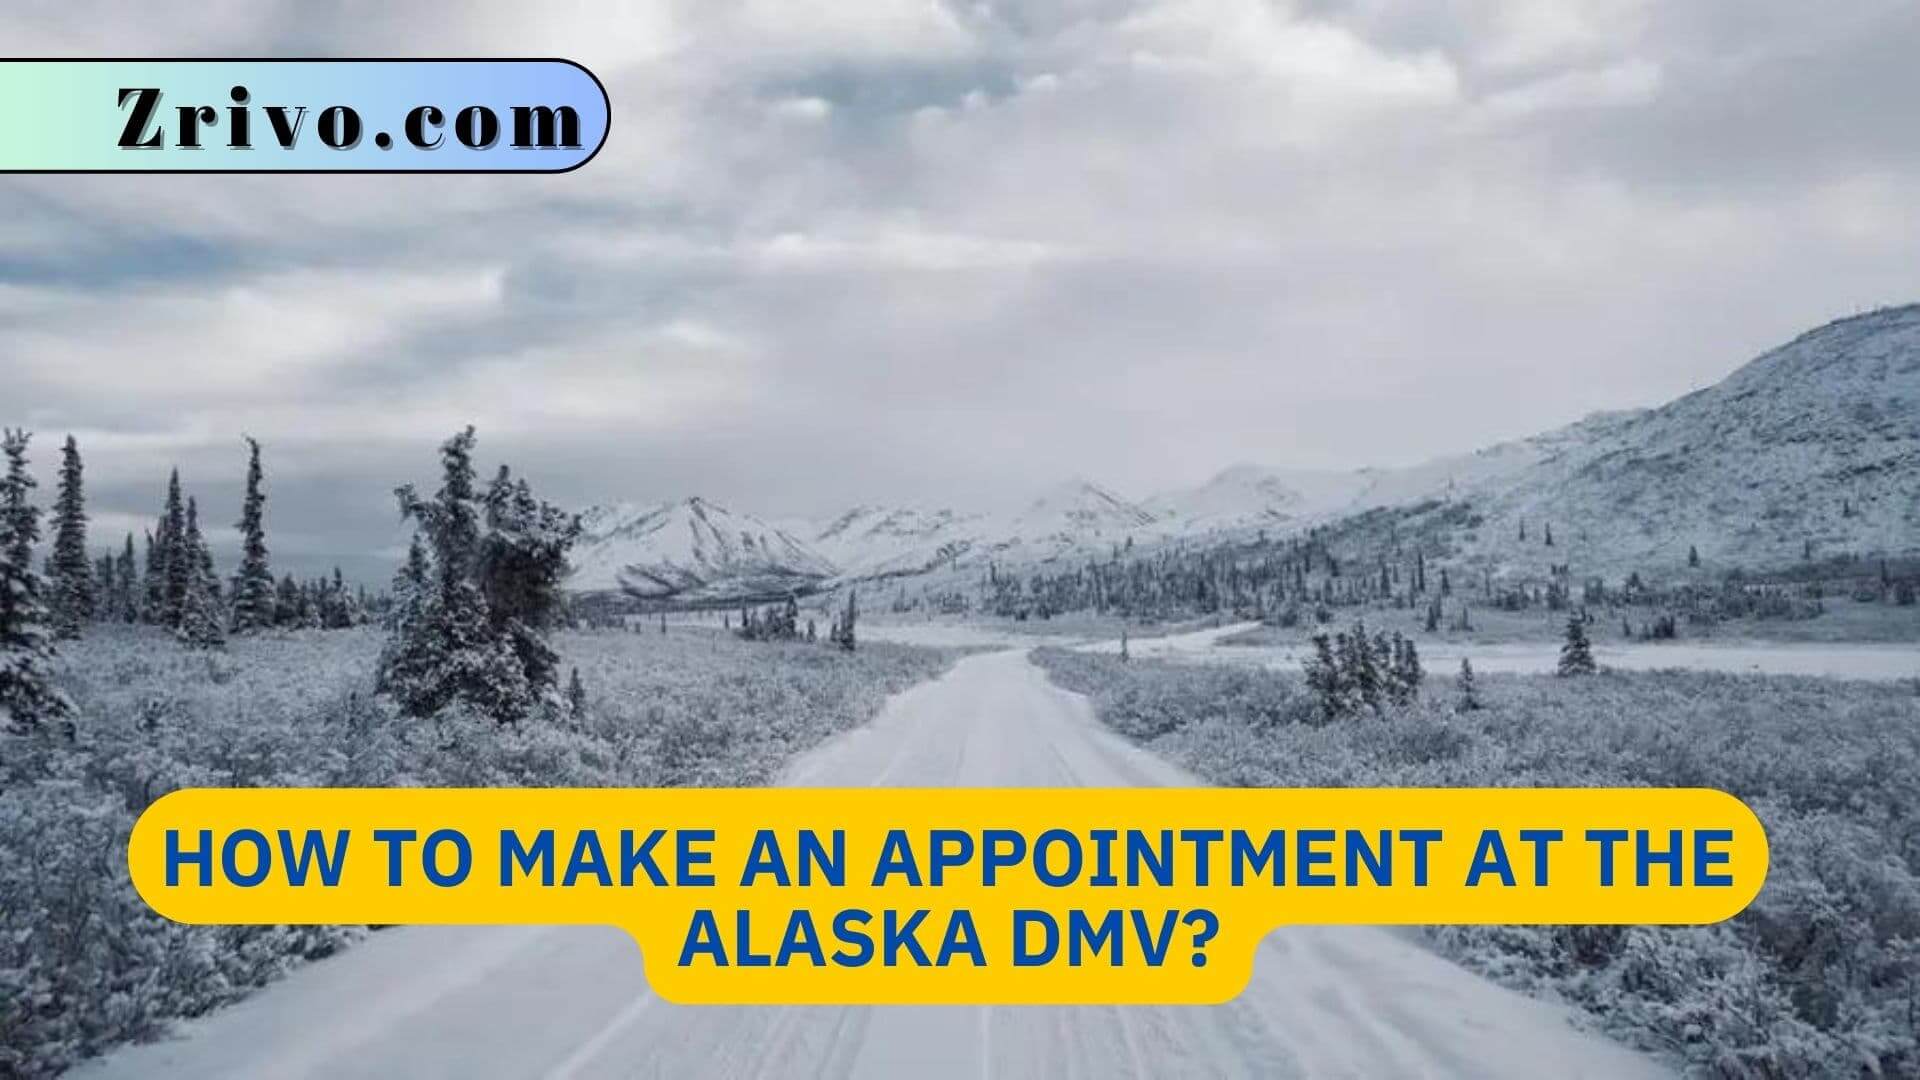 How to Make an Appointment at the Alaska DMV